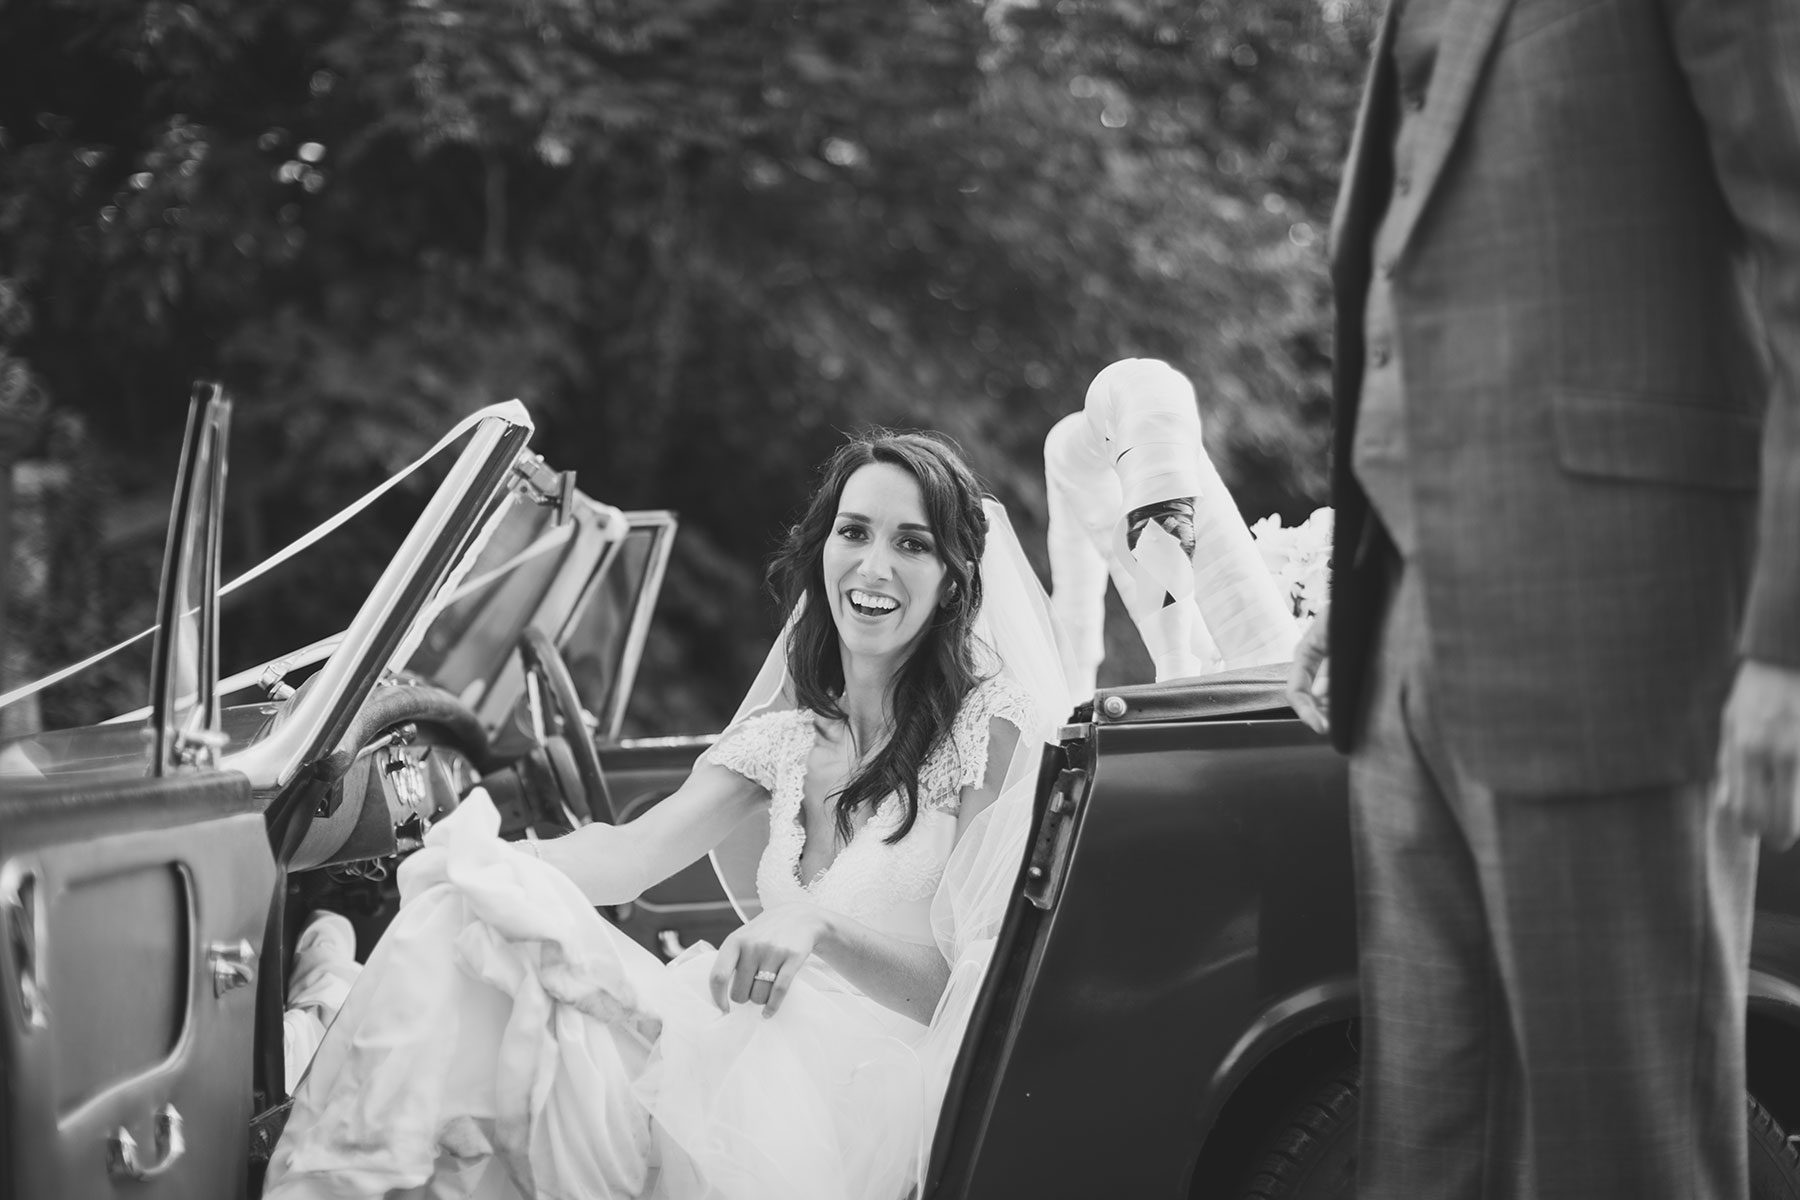 Climbing out - Reportage Wedding Photography in Cheltenham | Bullit Photography